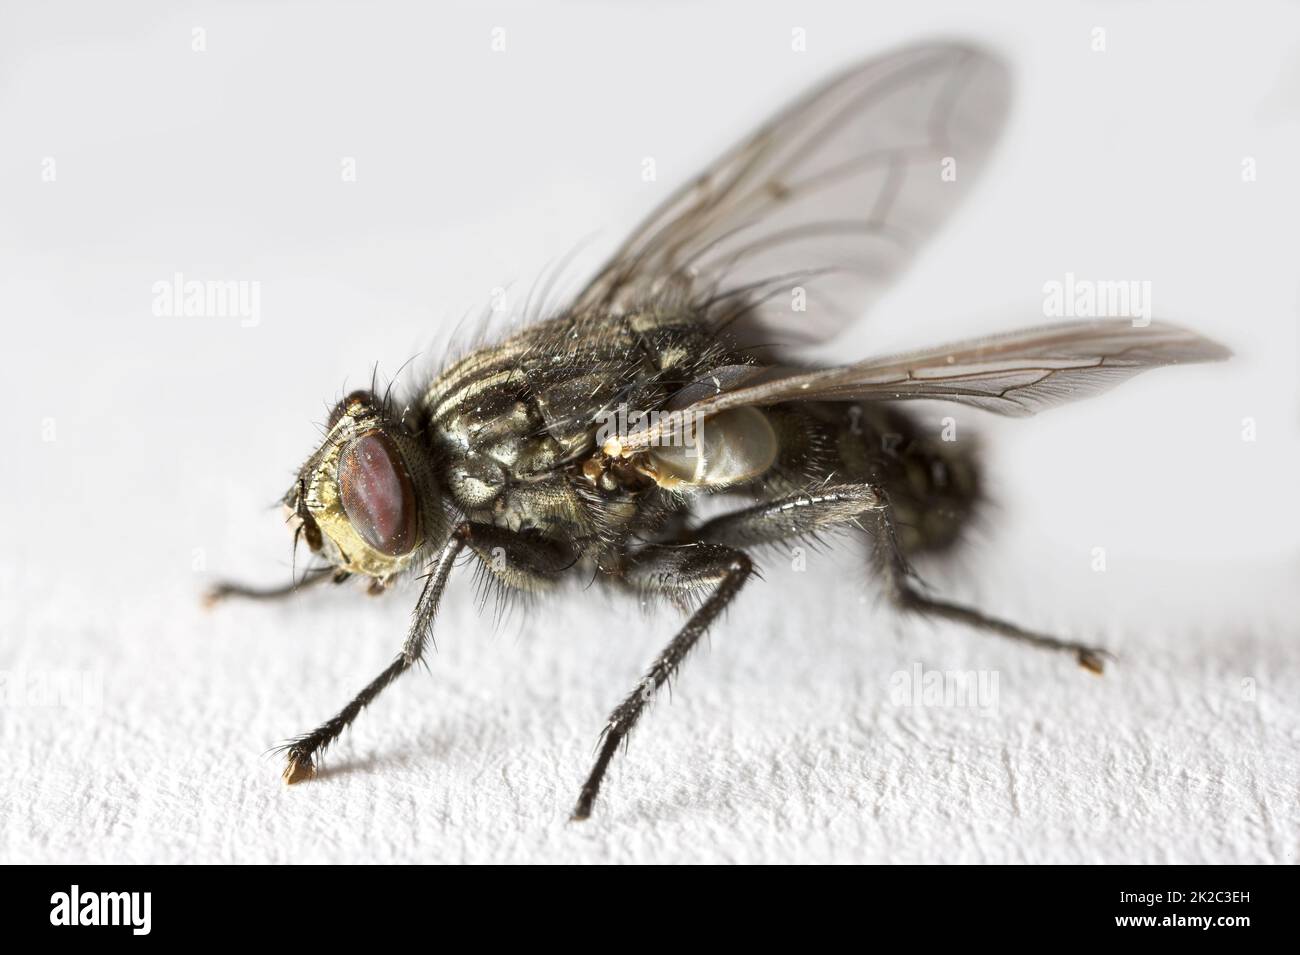 Housefly - Musca domestica. A photo of an ordinary housefly (Musca domestica). Stock Photo